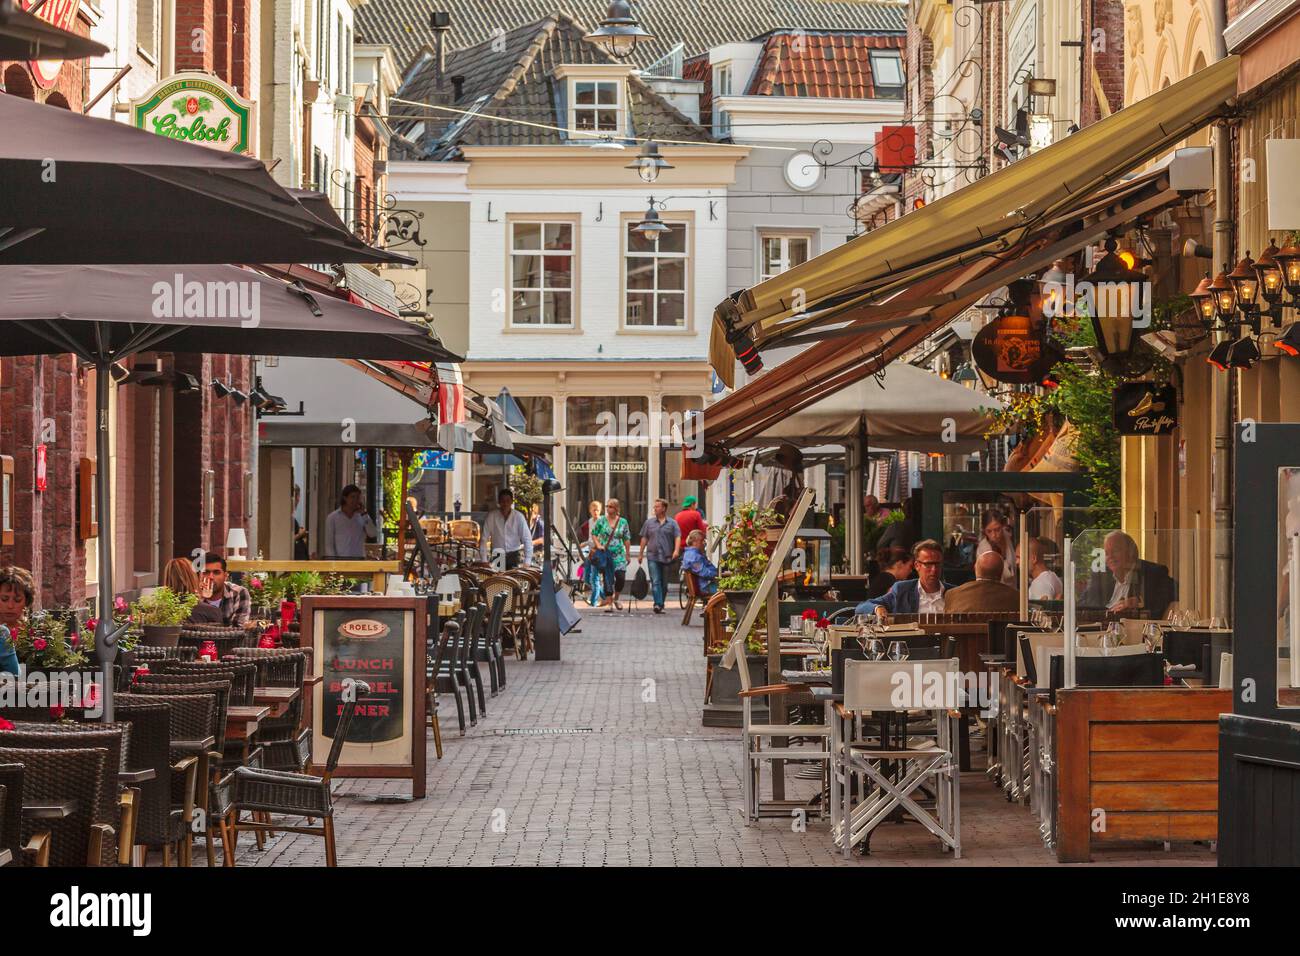 DEN BOSCH - AUGUST 12: Restaurant terraces in a small alley in the historic city center of the Dutch town Den Bosch. Stock Photo